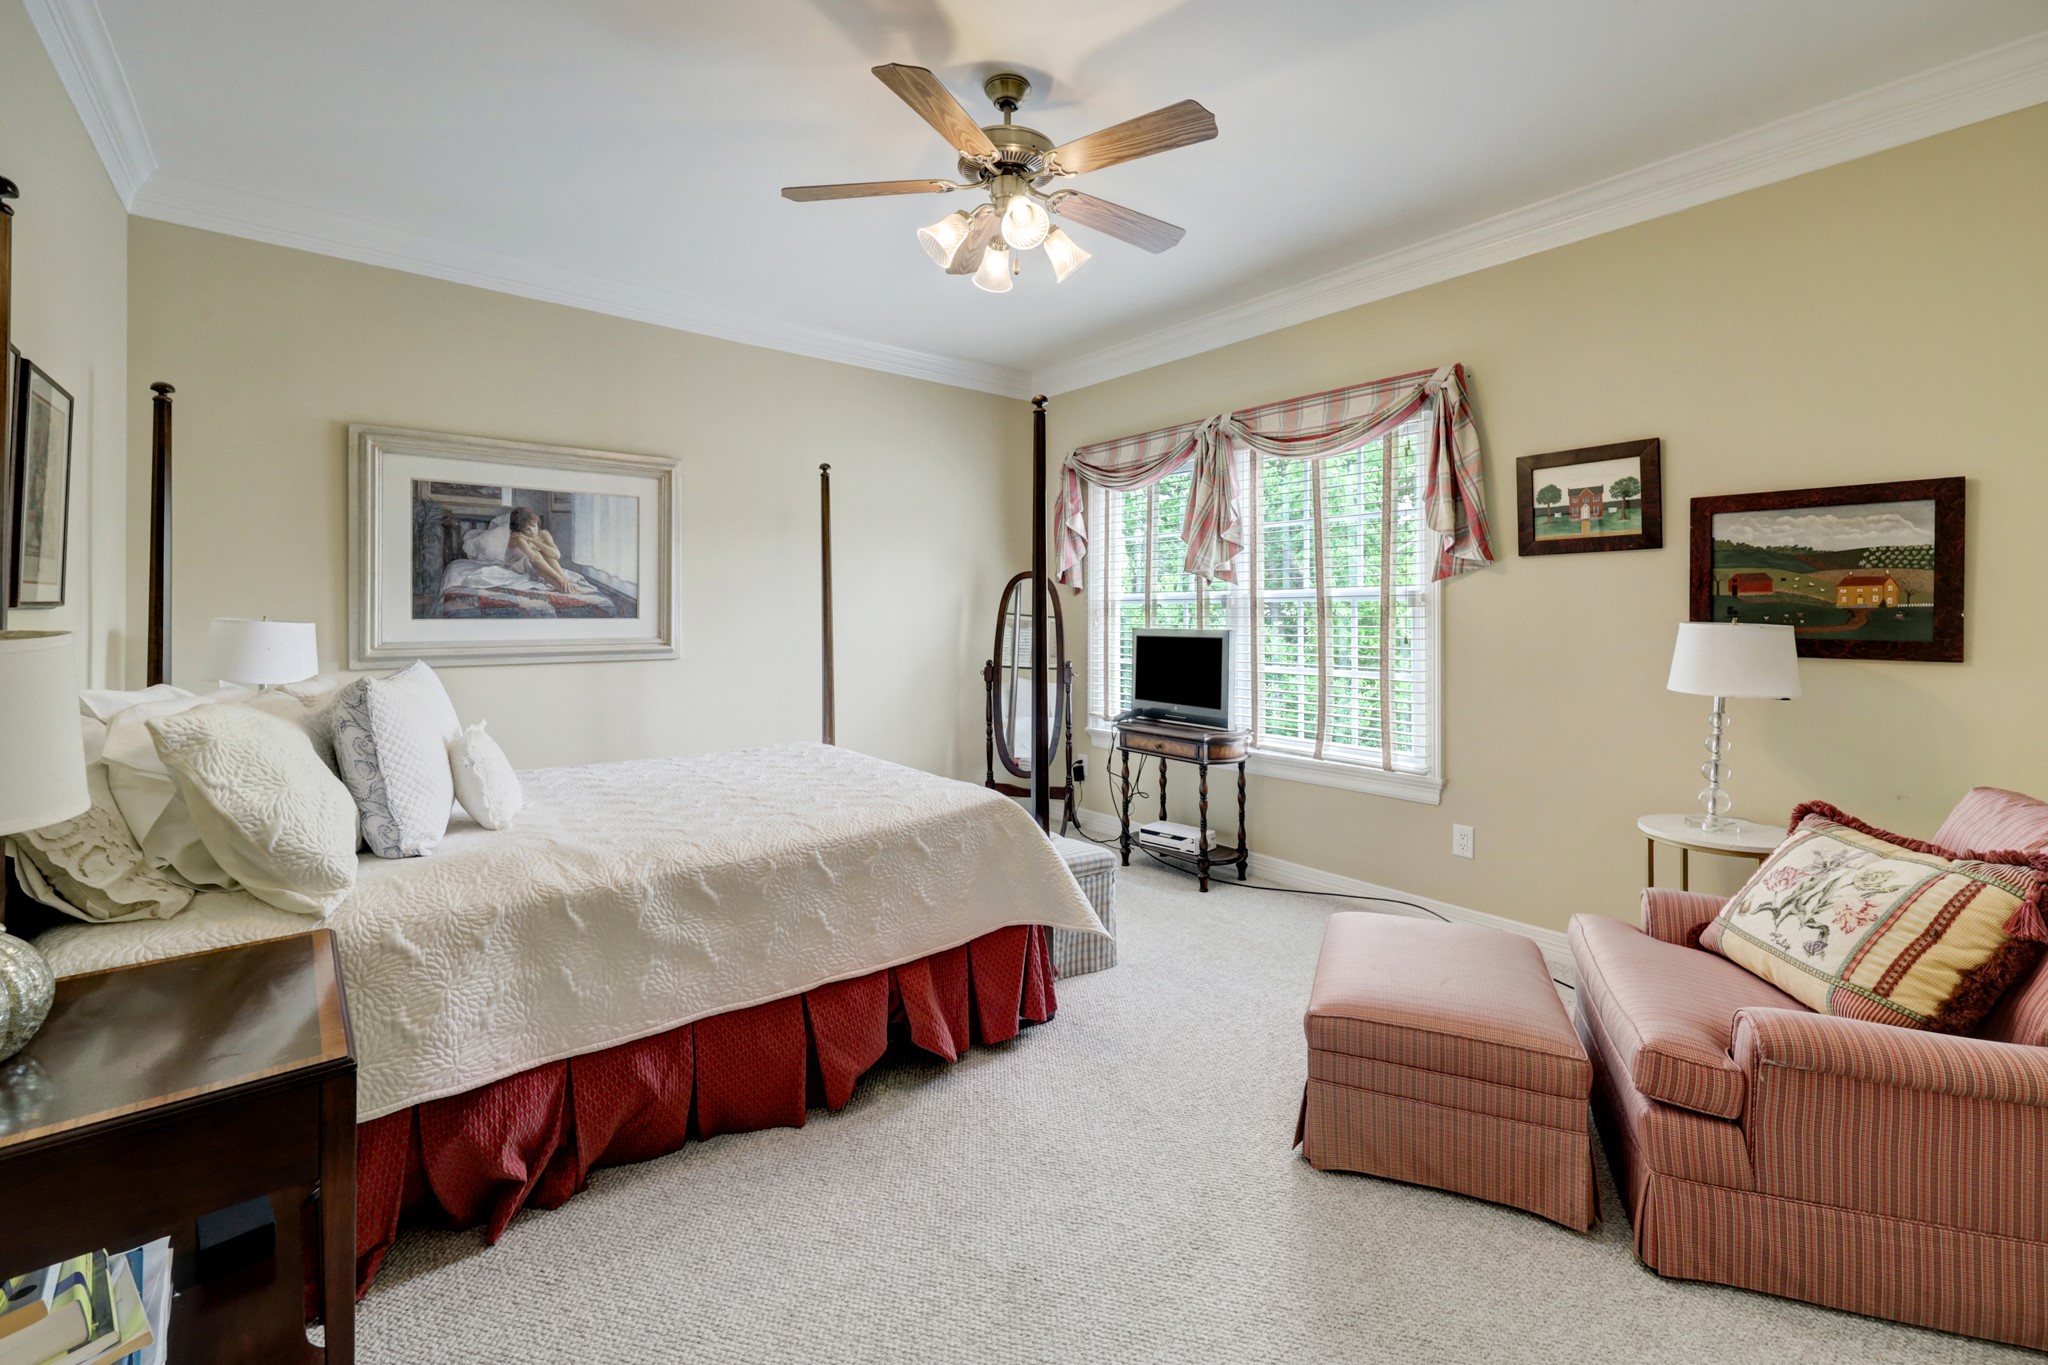 Guest bedroom located on the second floor with en suite bathroom, carpet and walk-in closet.
